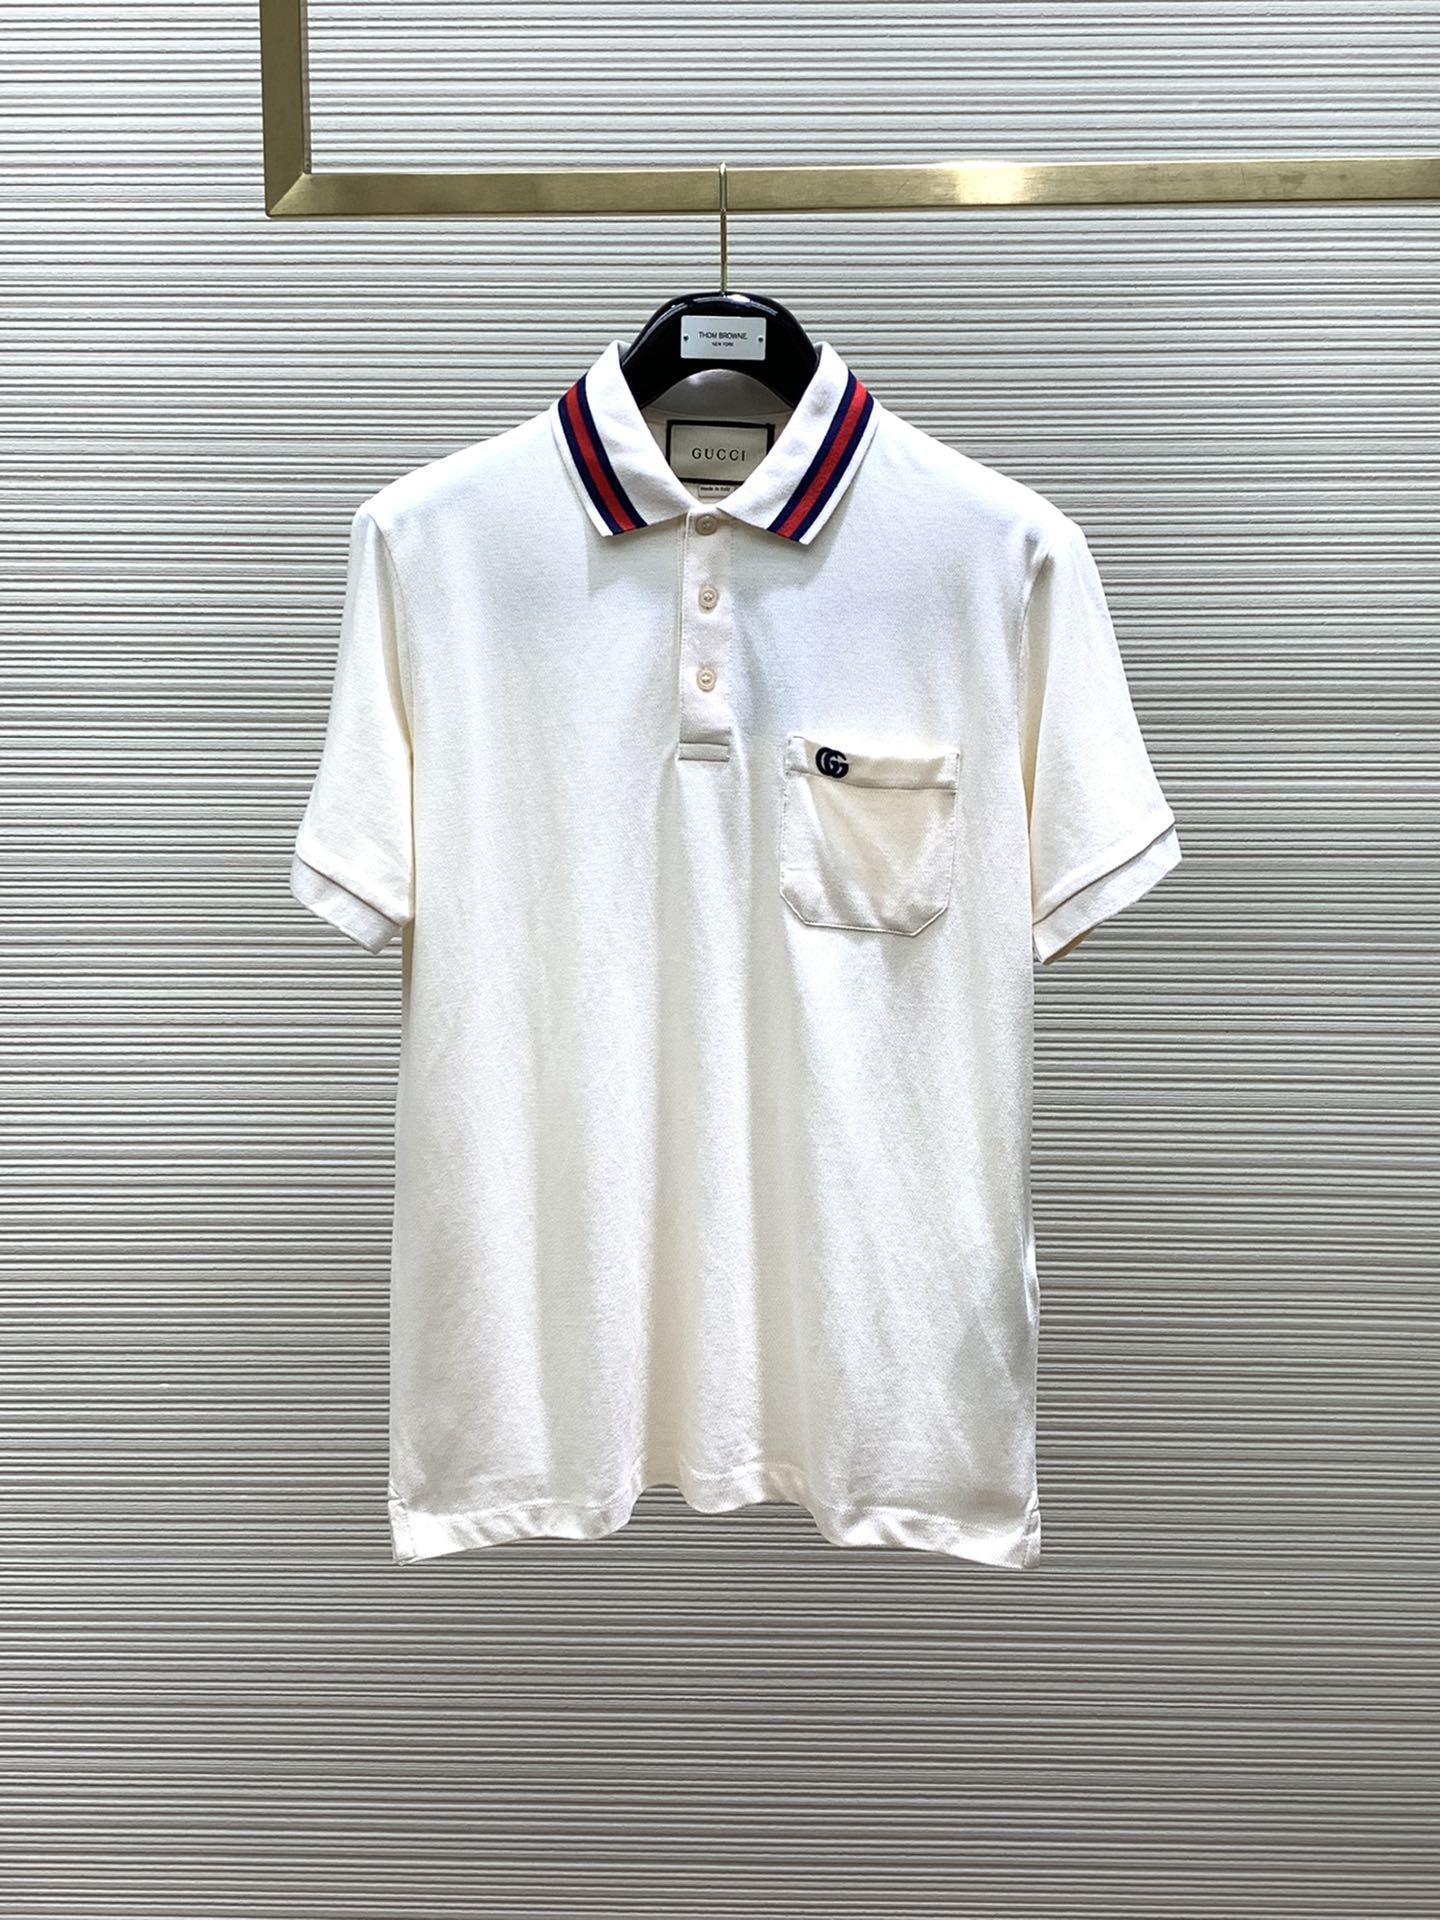 Replica Every Designer
 Gucci Fake
 Clothing Polo T-Shirt Embroidery Summer Collection Fashion Short Sleeve